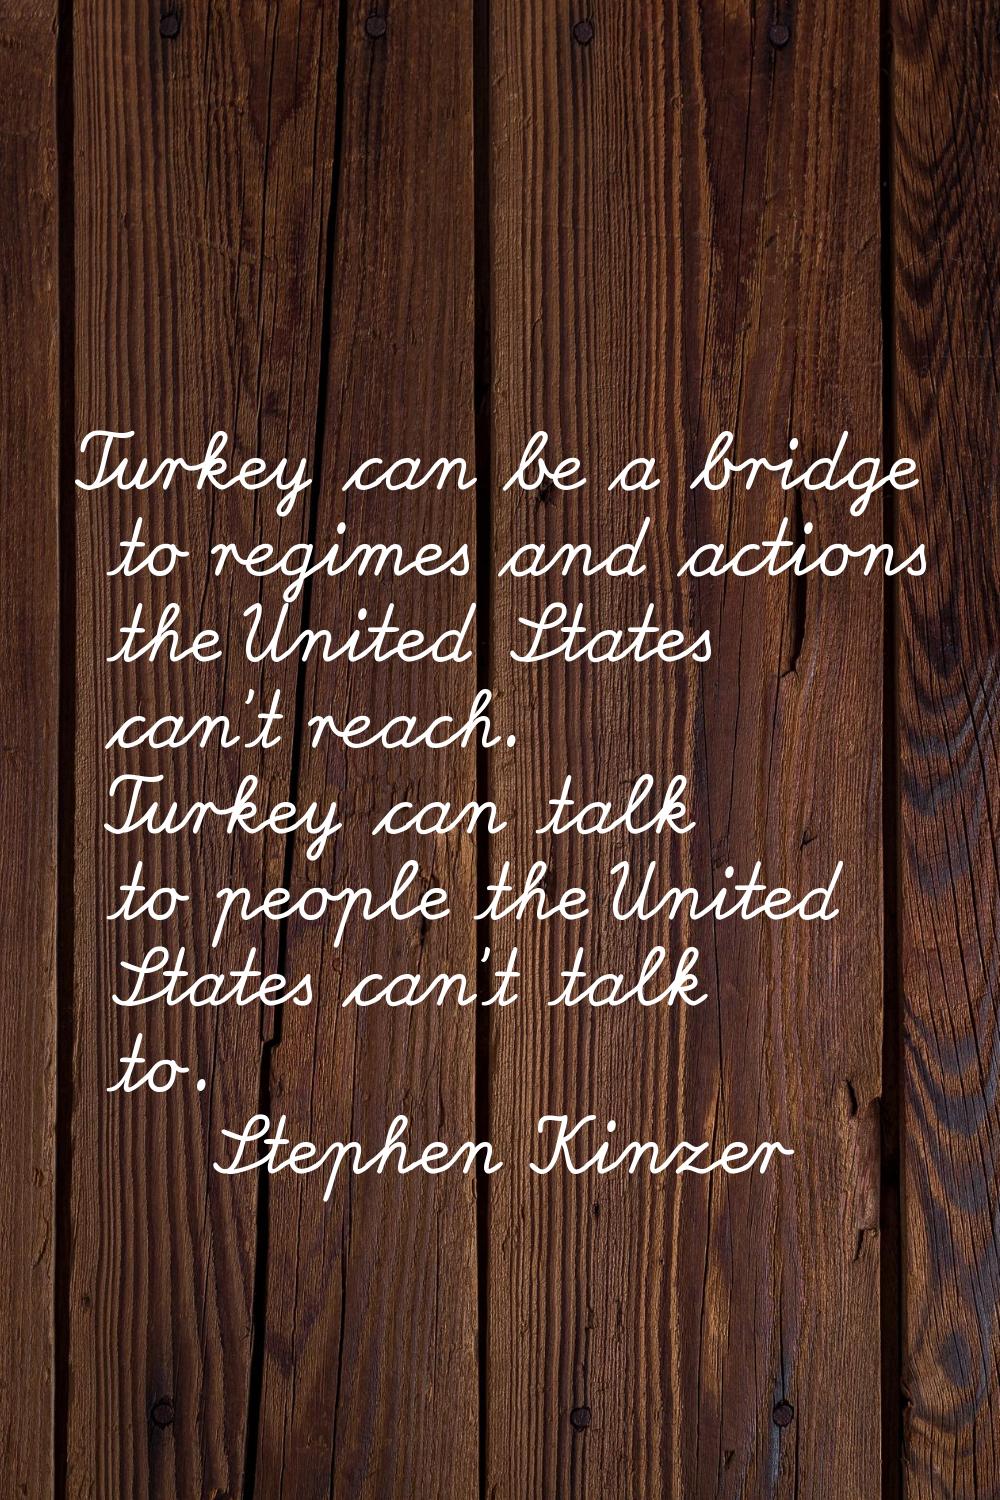 Turkey can be a bridge to regimes and actions the United States can't reach. Turkey can talk to peo